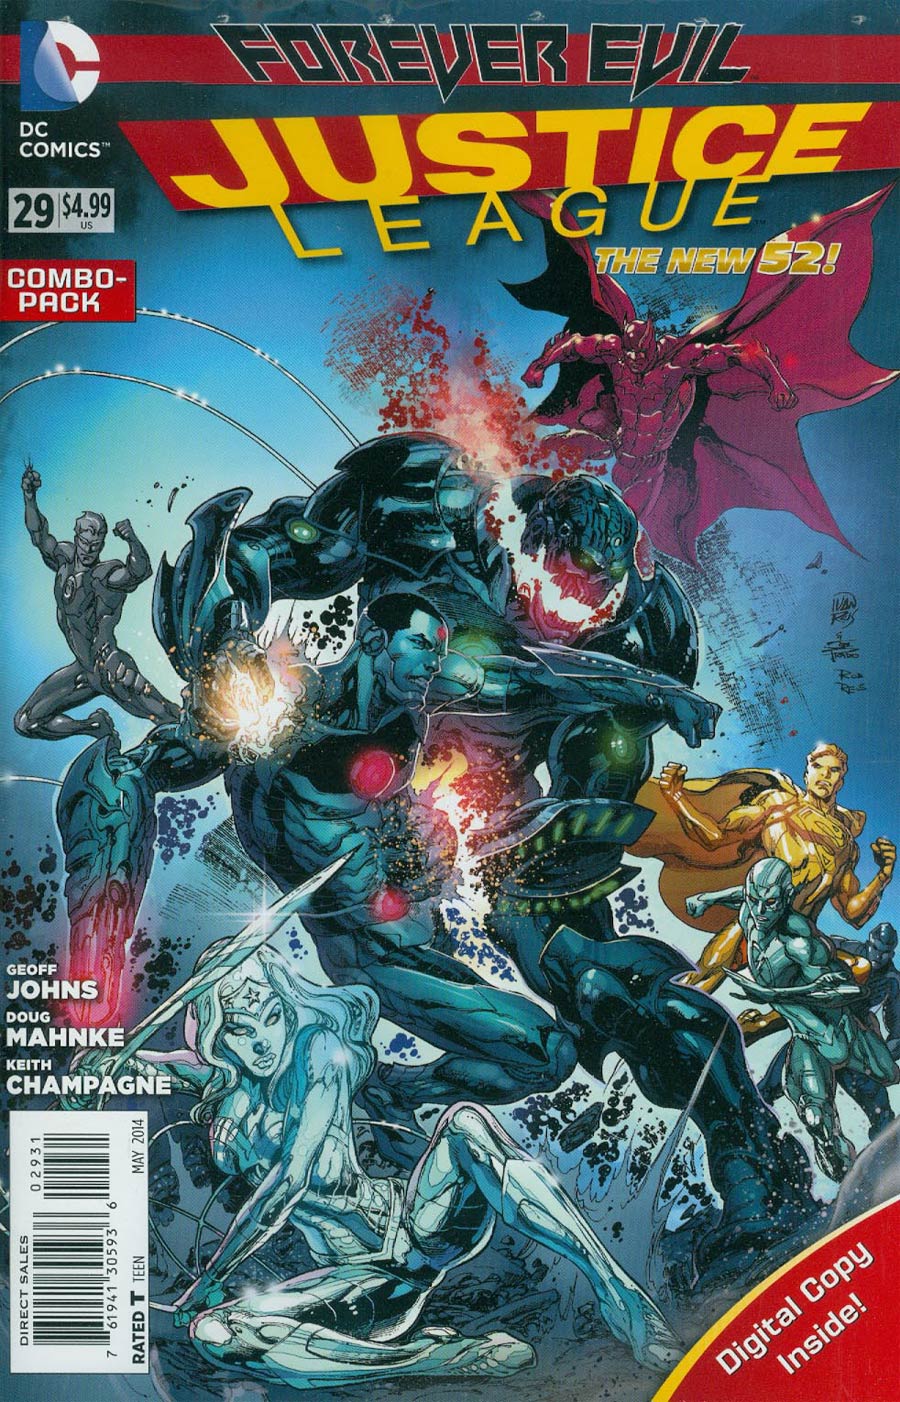 Justice League Vol 2 #29 Cover B Combo Pack With Polybag (Forever Evil Tie-In)